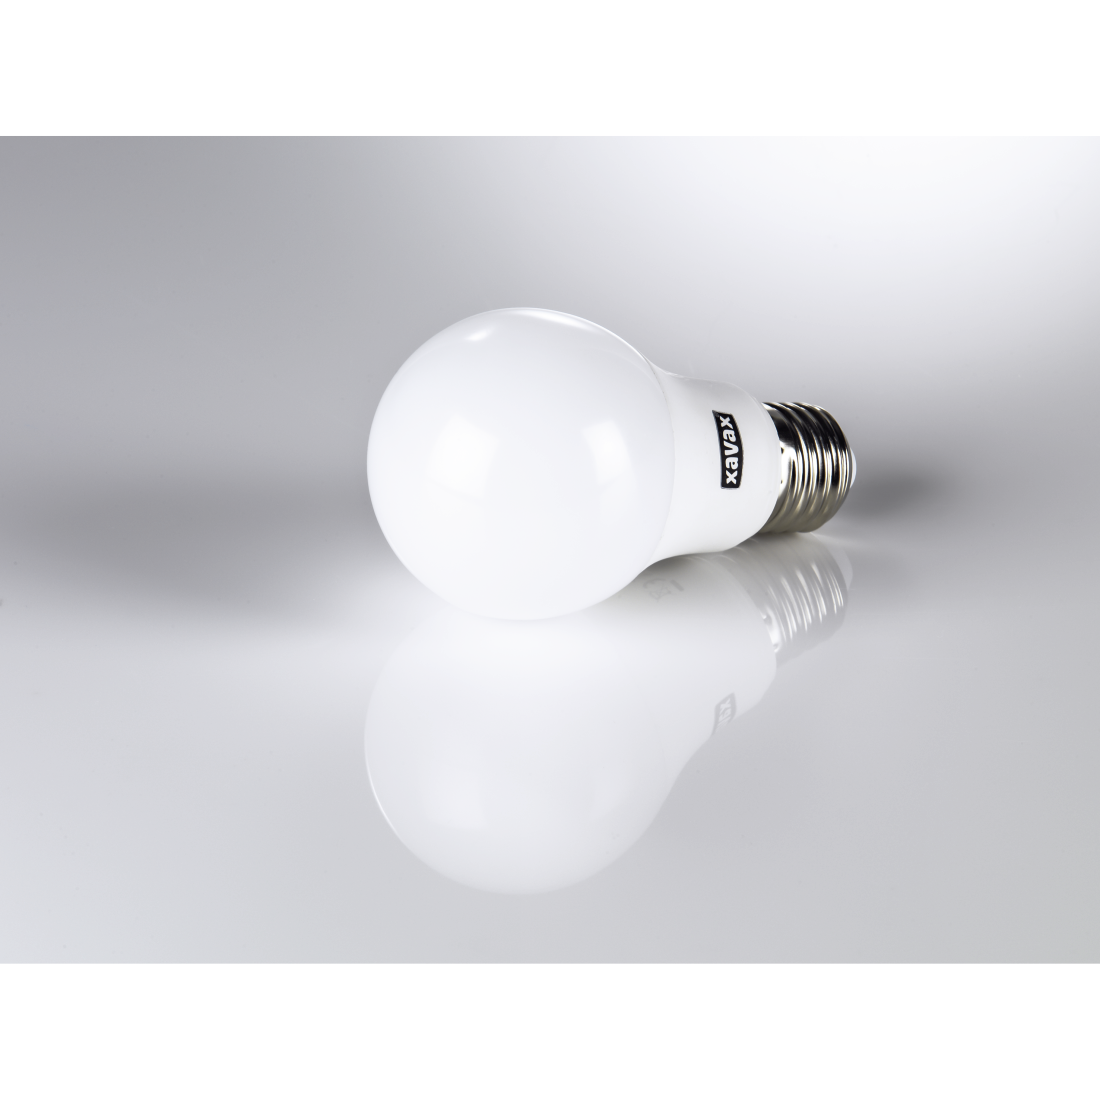 abx3 High-Res Image 3 - Xavax, LED Bulb, E27, 470lm replaces 40W, incandescent bulb, warm white, RA90